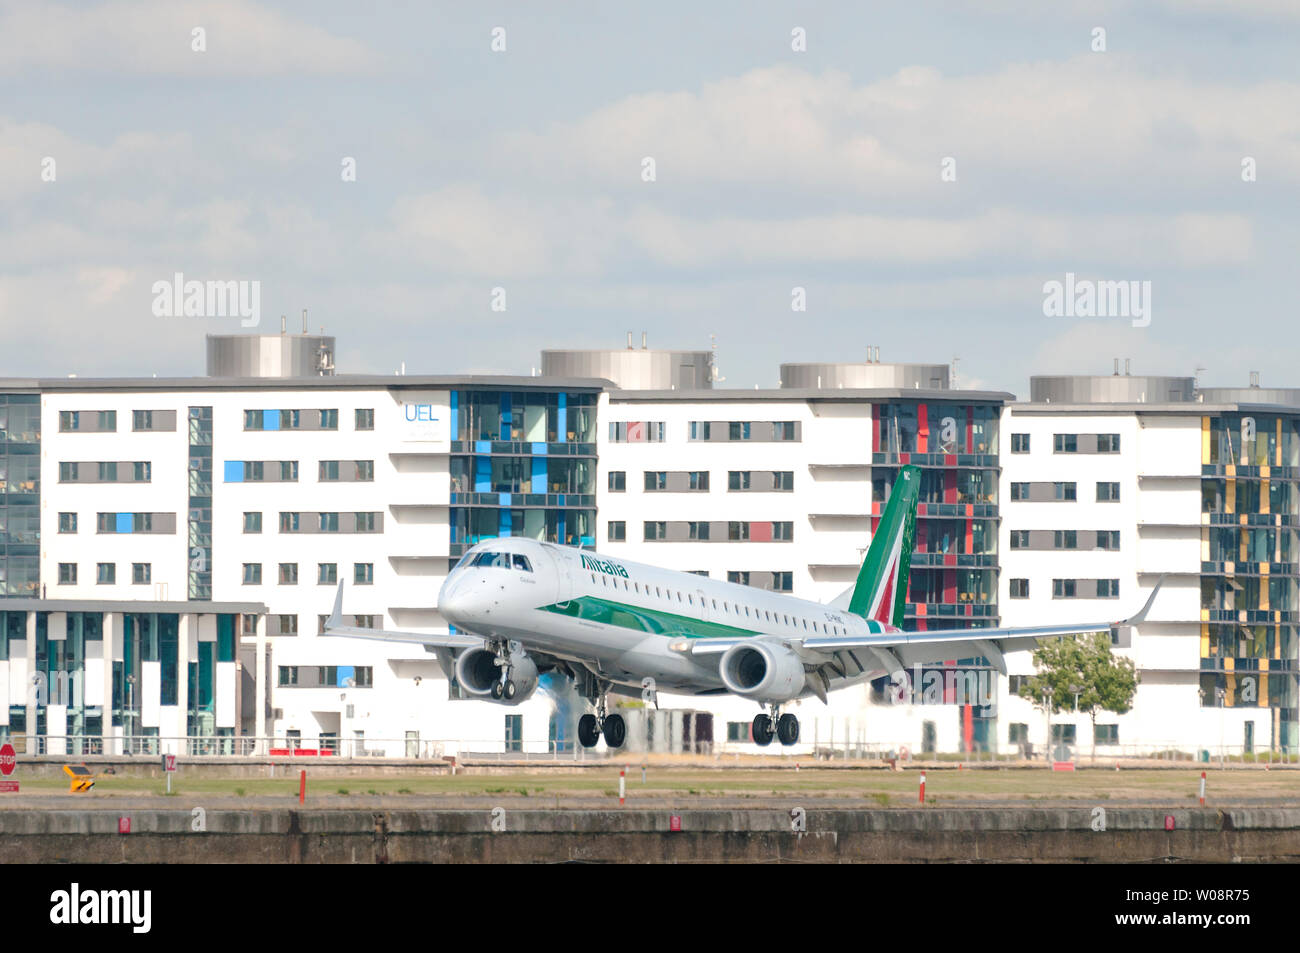 LONDON, UK - AUGUST 02, 2013: Alitalia airplane land at London City Airport, the fifth busiest airport in London. Stock Photo